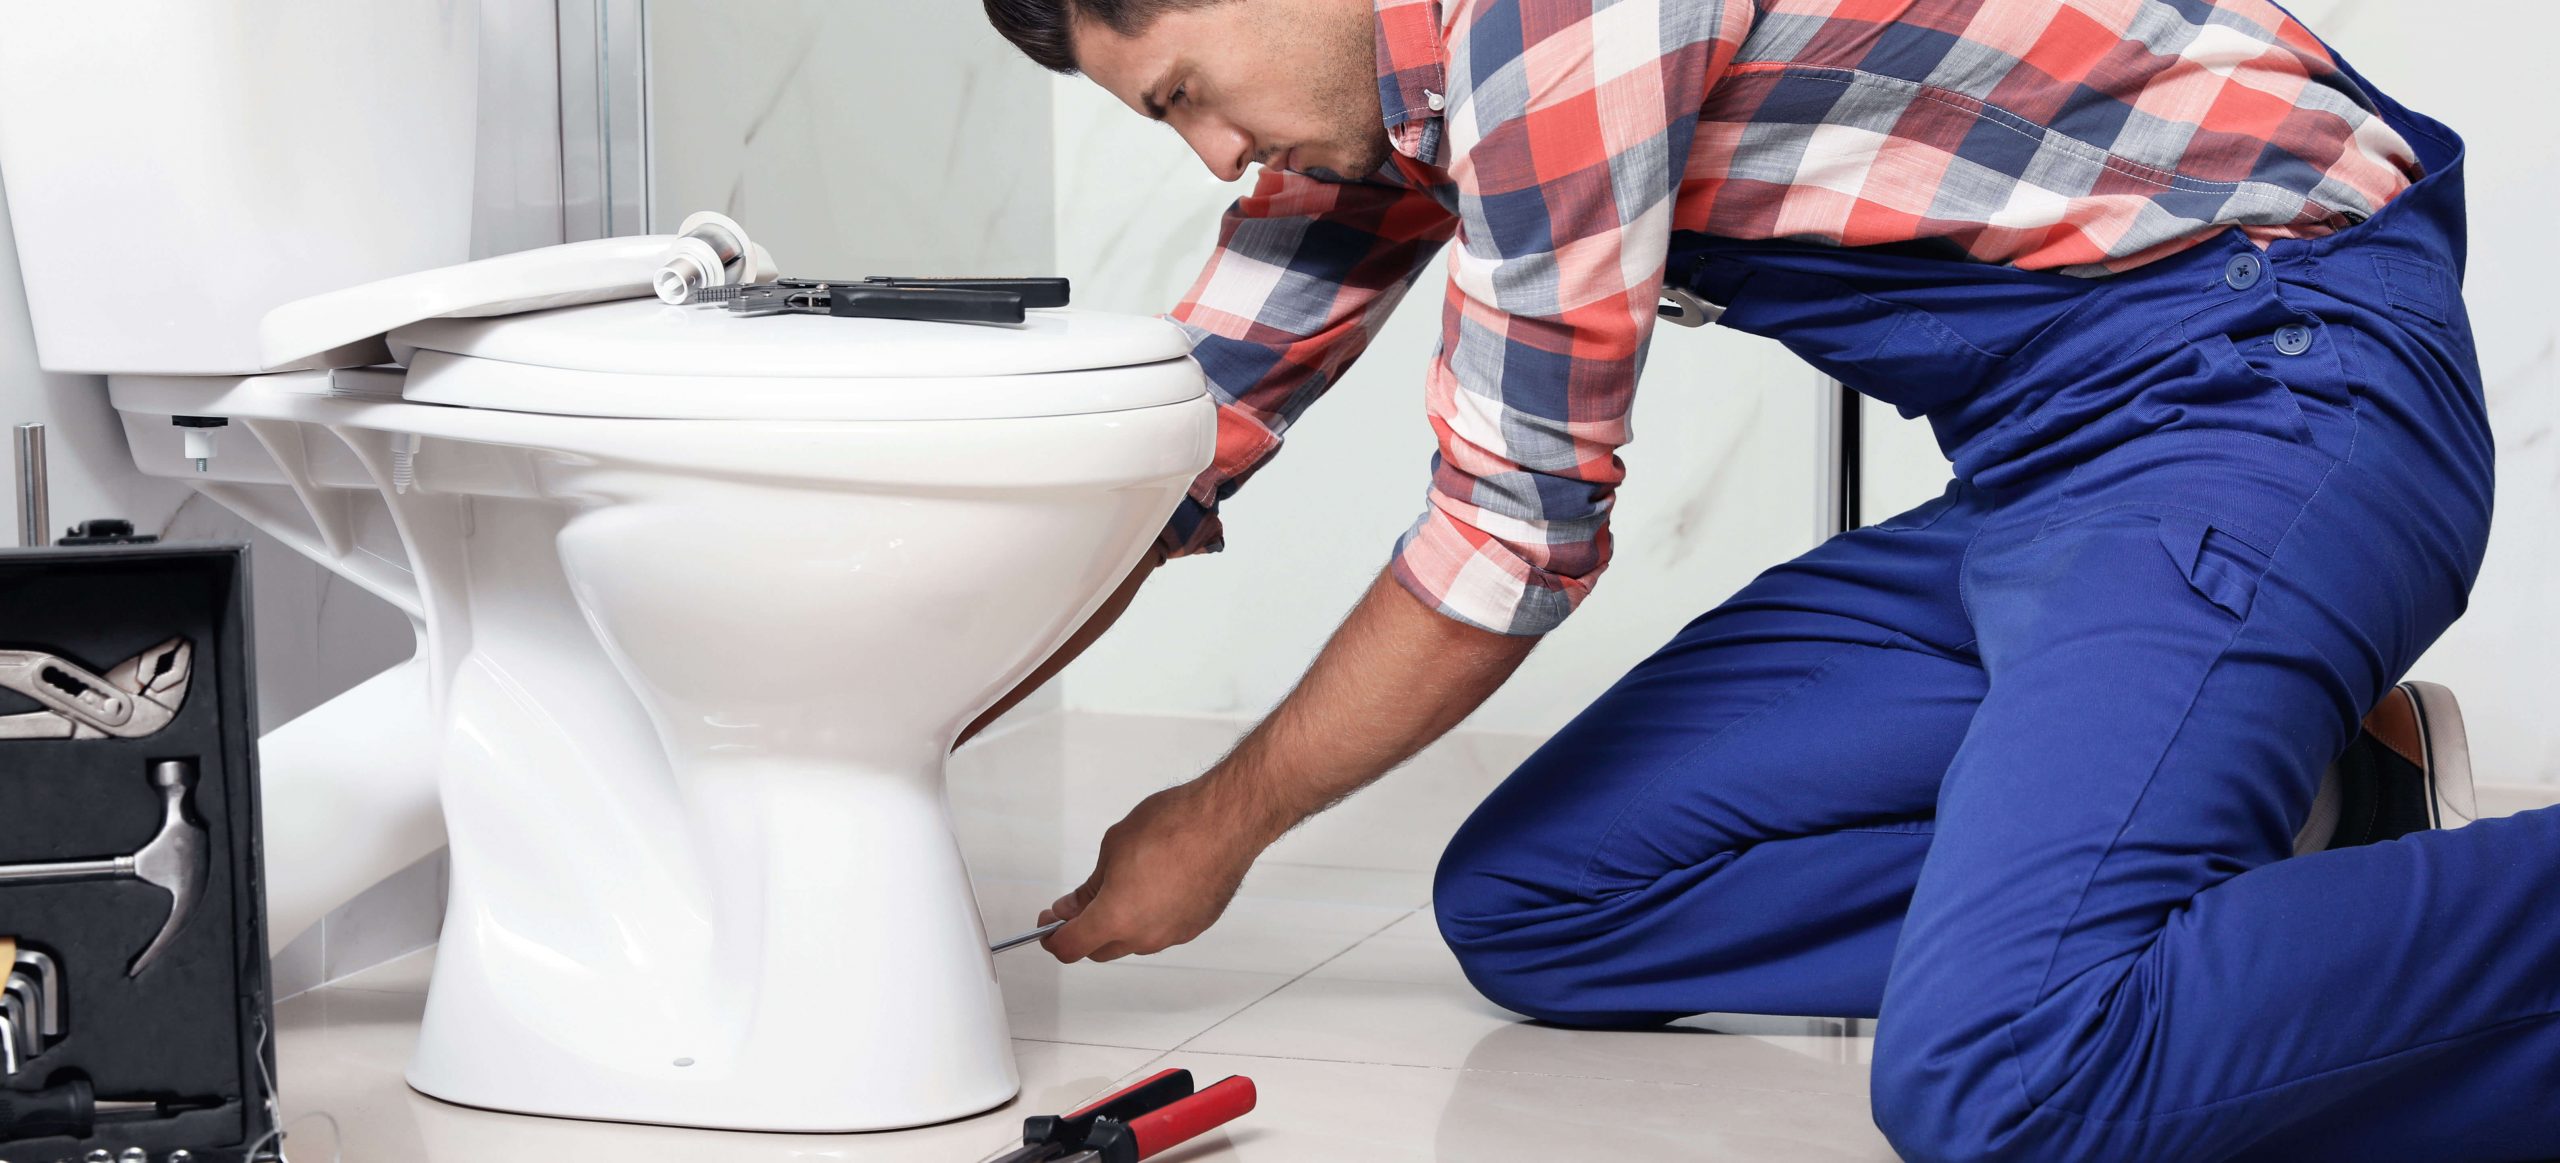 Installing a standing toilet bowl |  zoofy so fixed